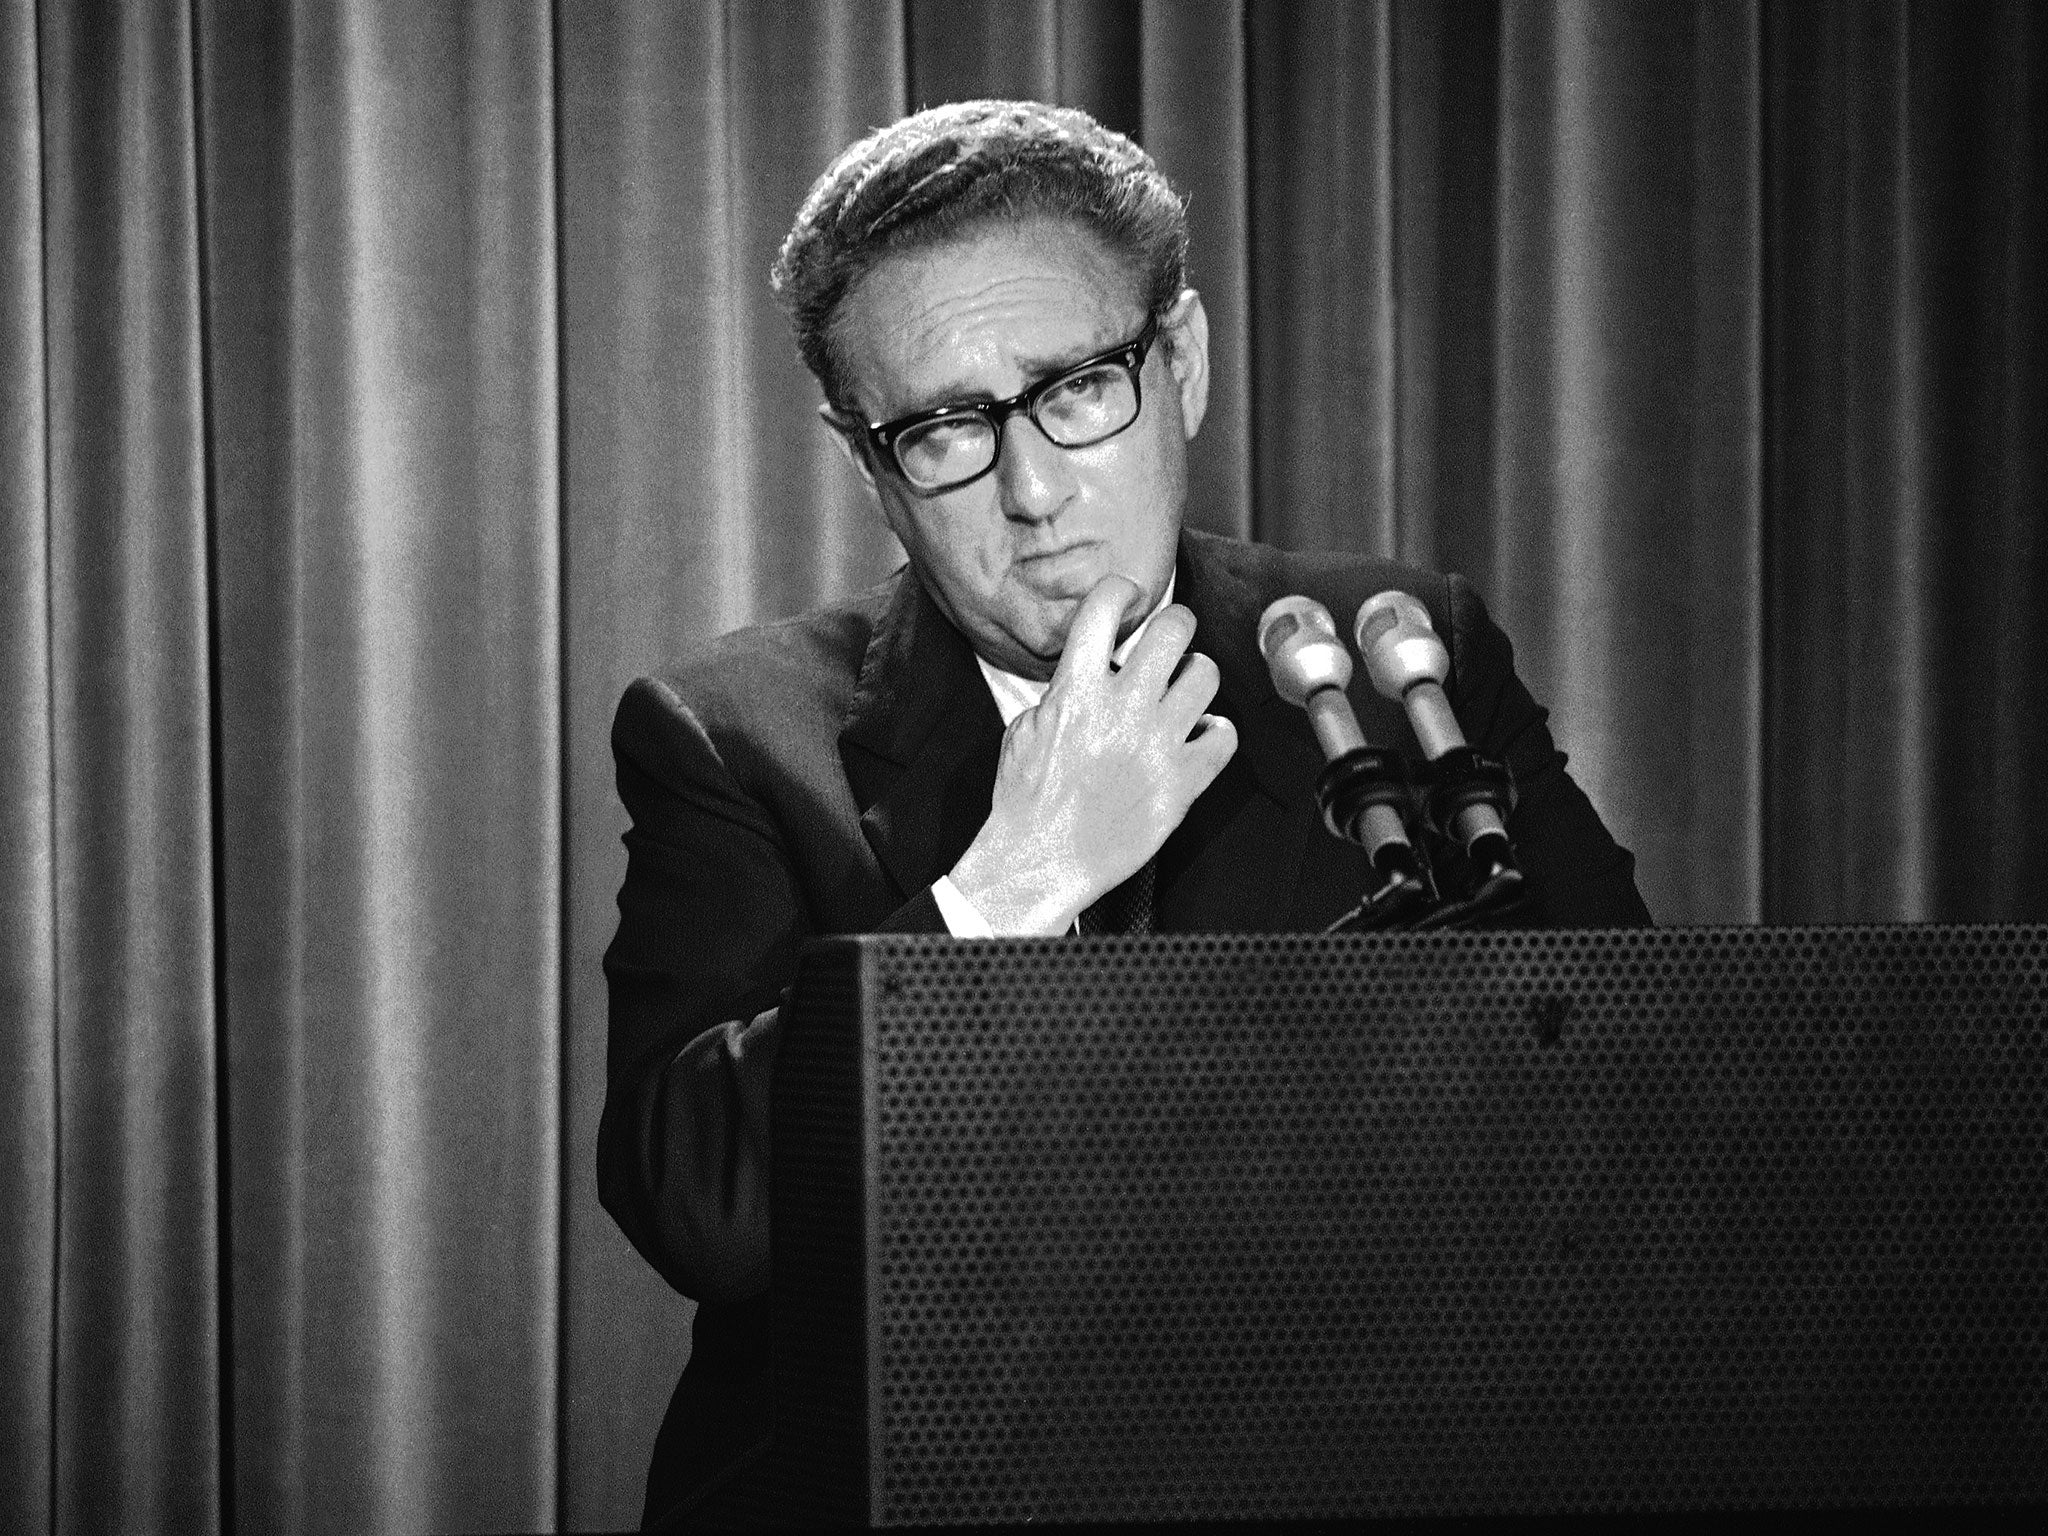 Henry Kissinger leaves a controversial legacy